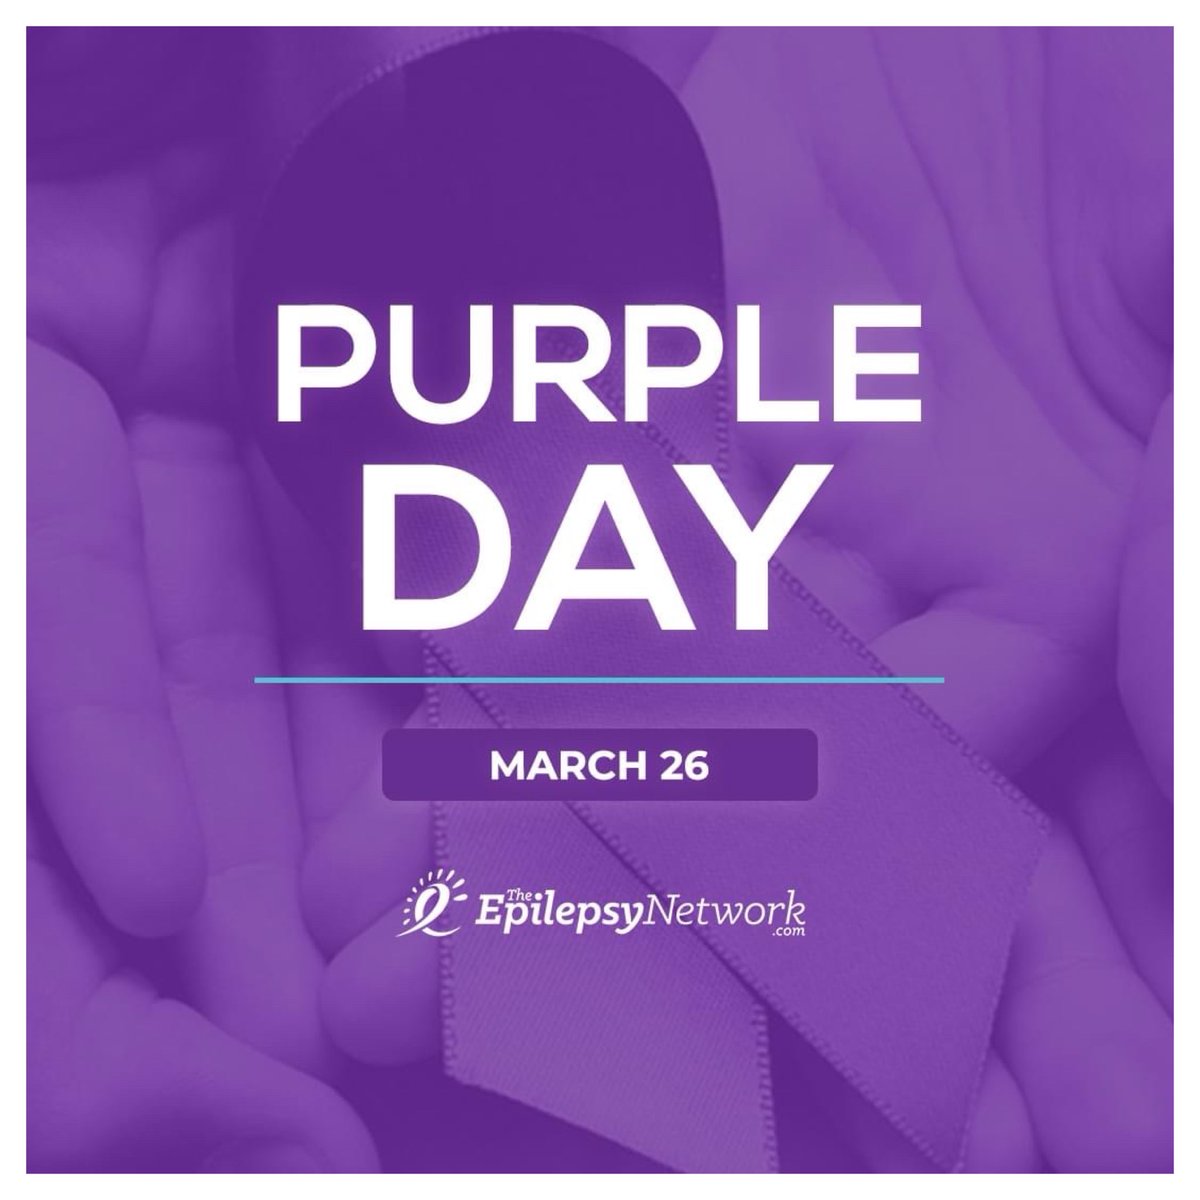 Happy Purple Day! 💜 Let’s take today to wear the color purple and raise awareness about epilepsy! #epilepsy #epilepsyawareness #purpleday